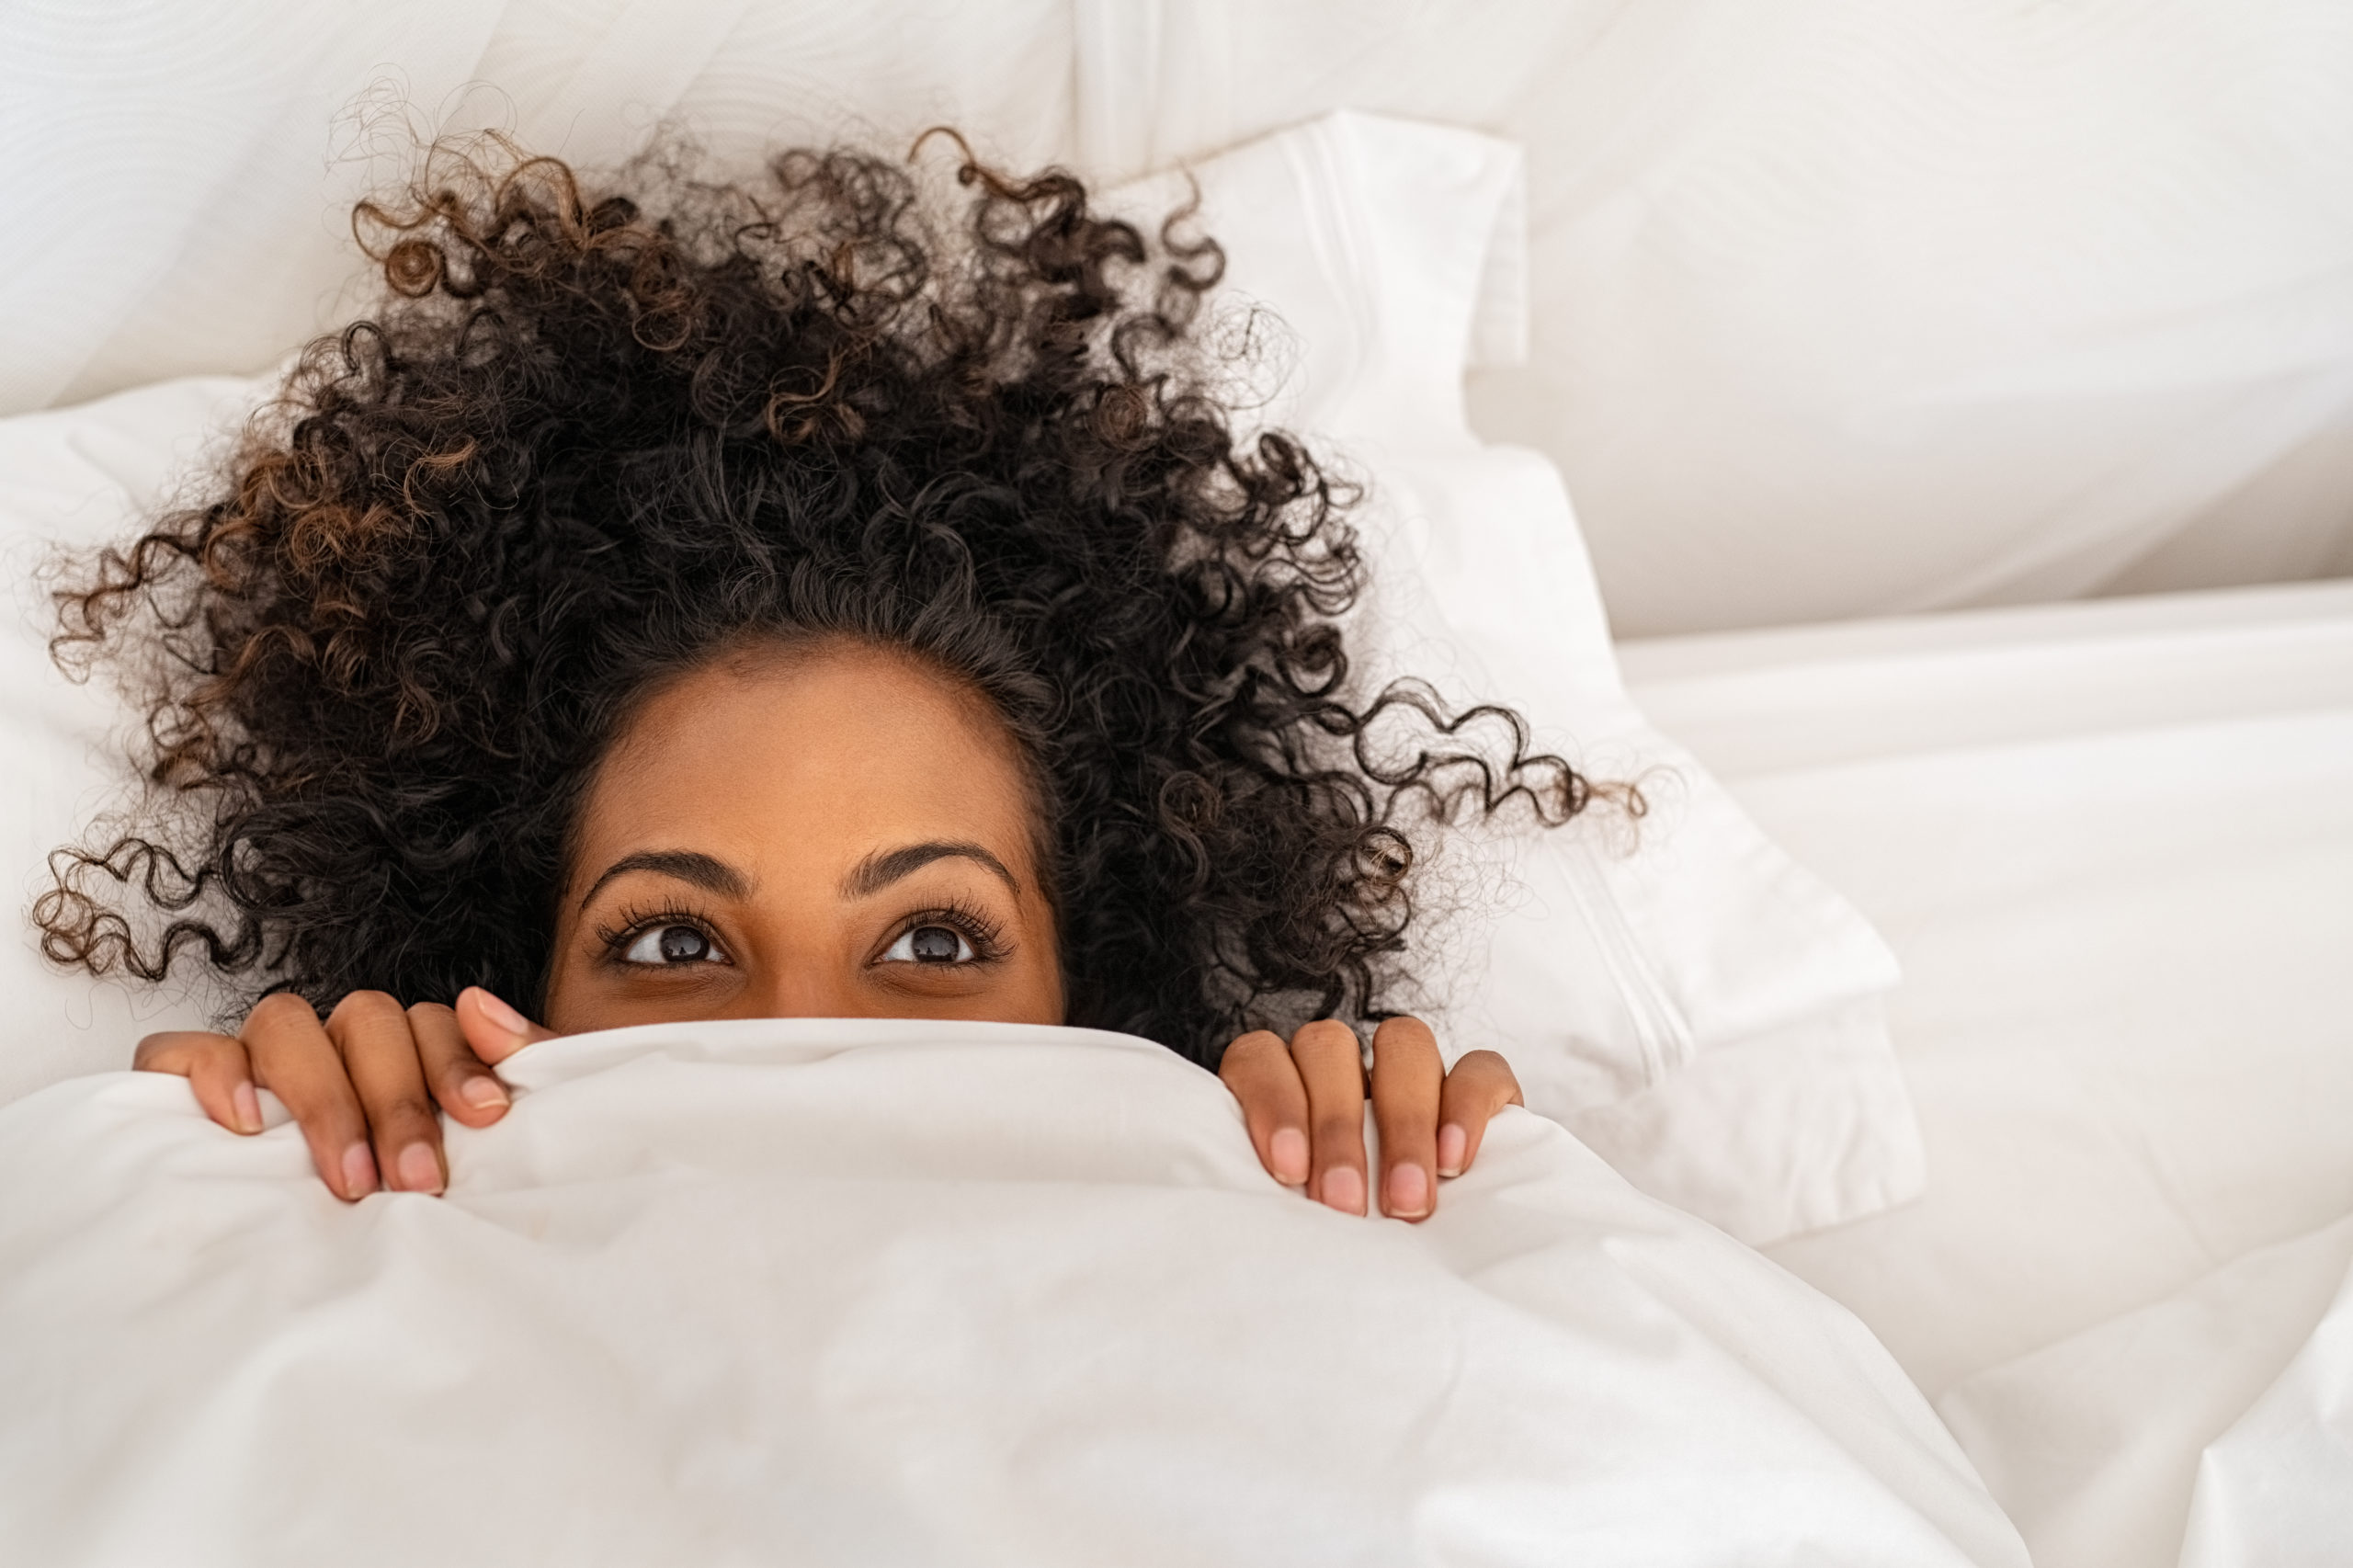 Is it ok to sleep naked? Sleep expert shares 6 things you need to know